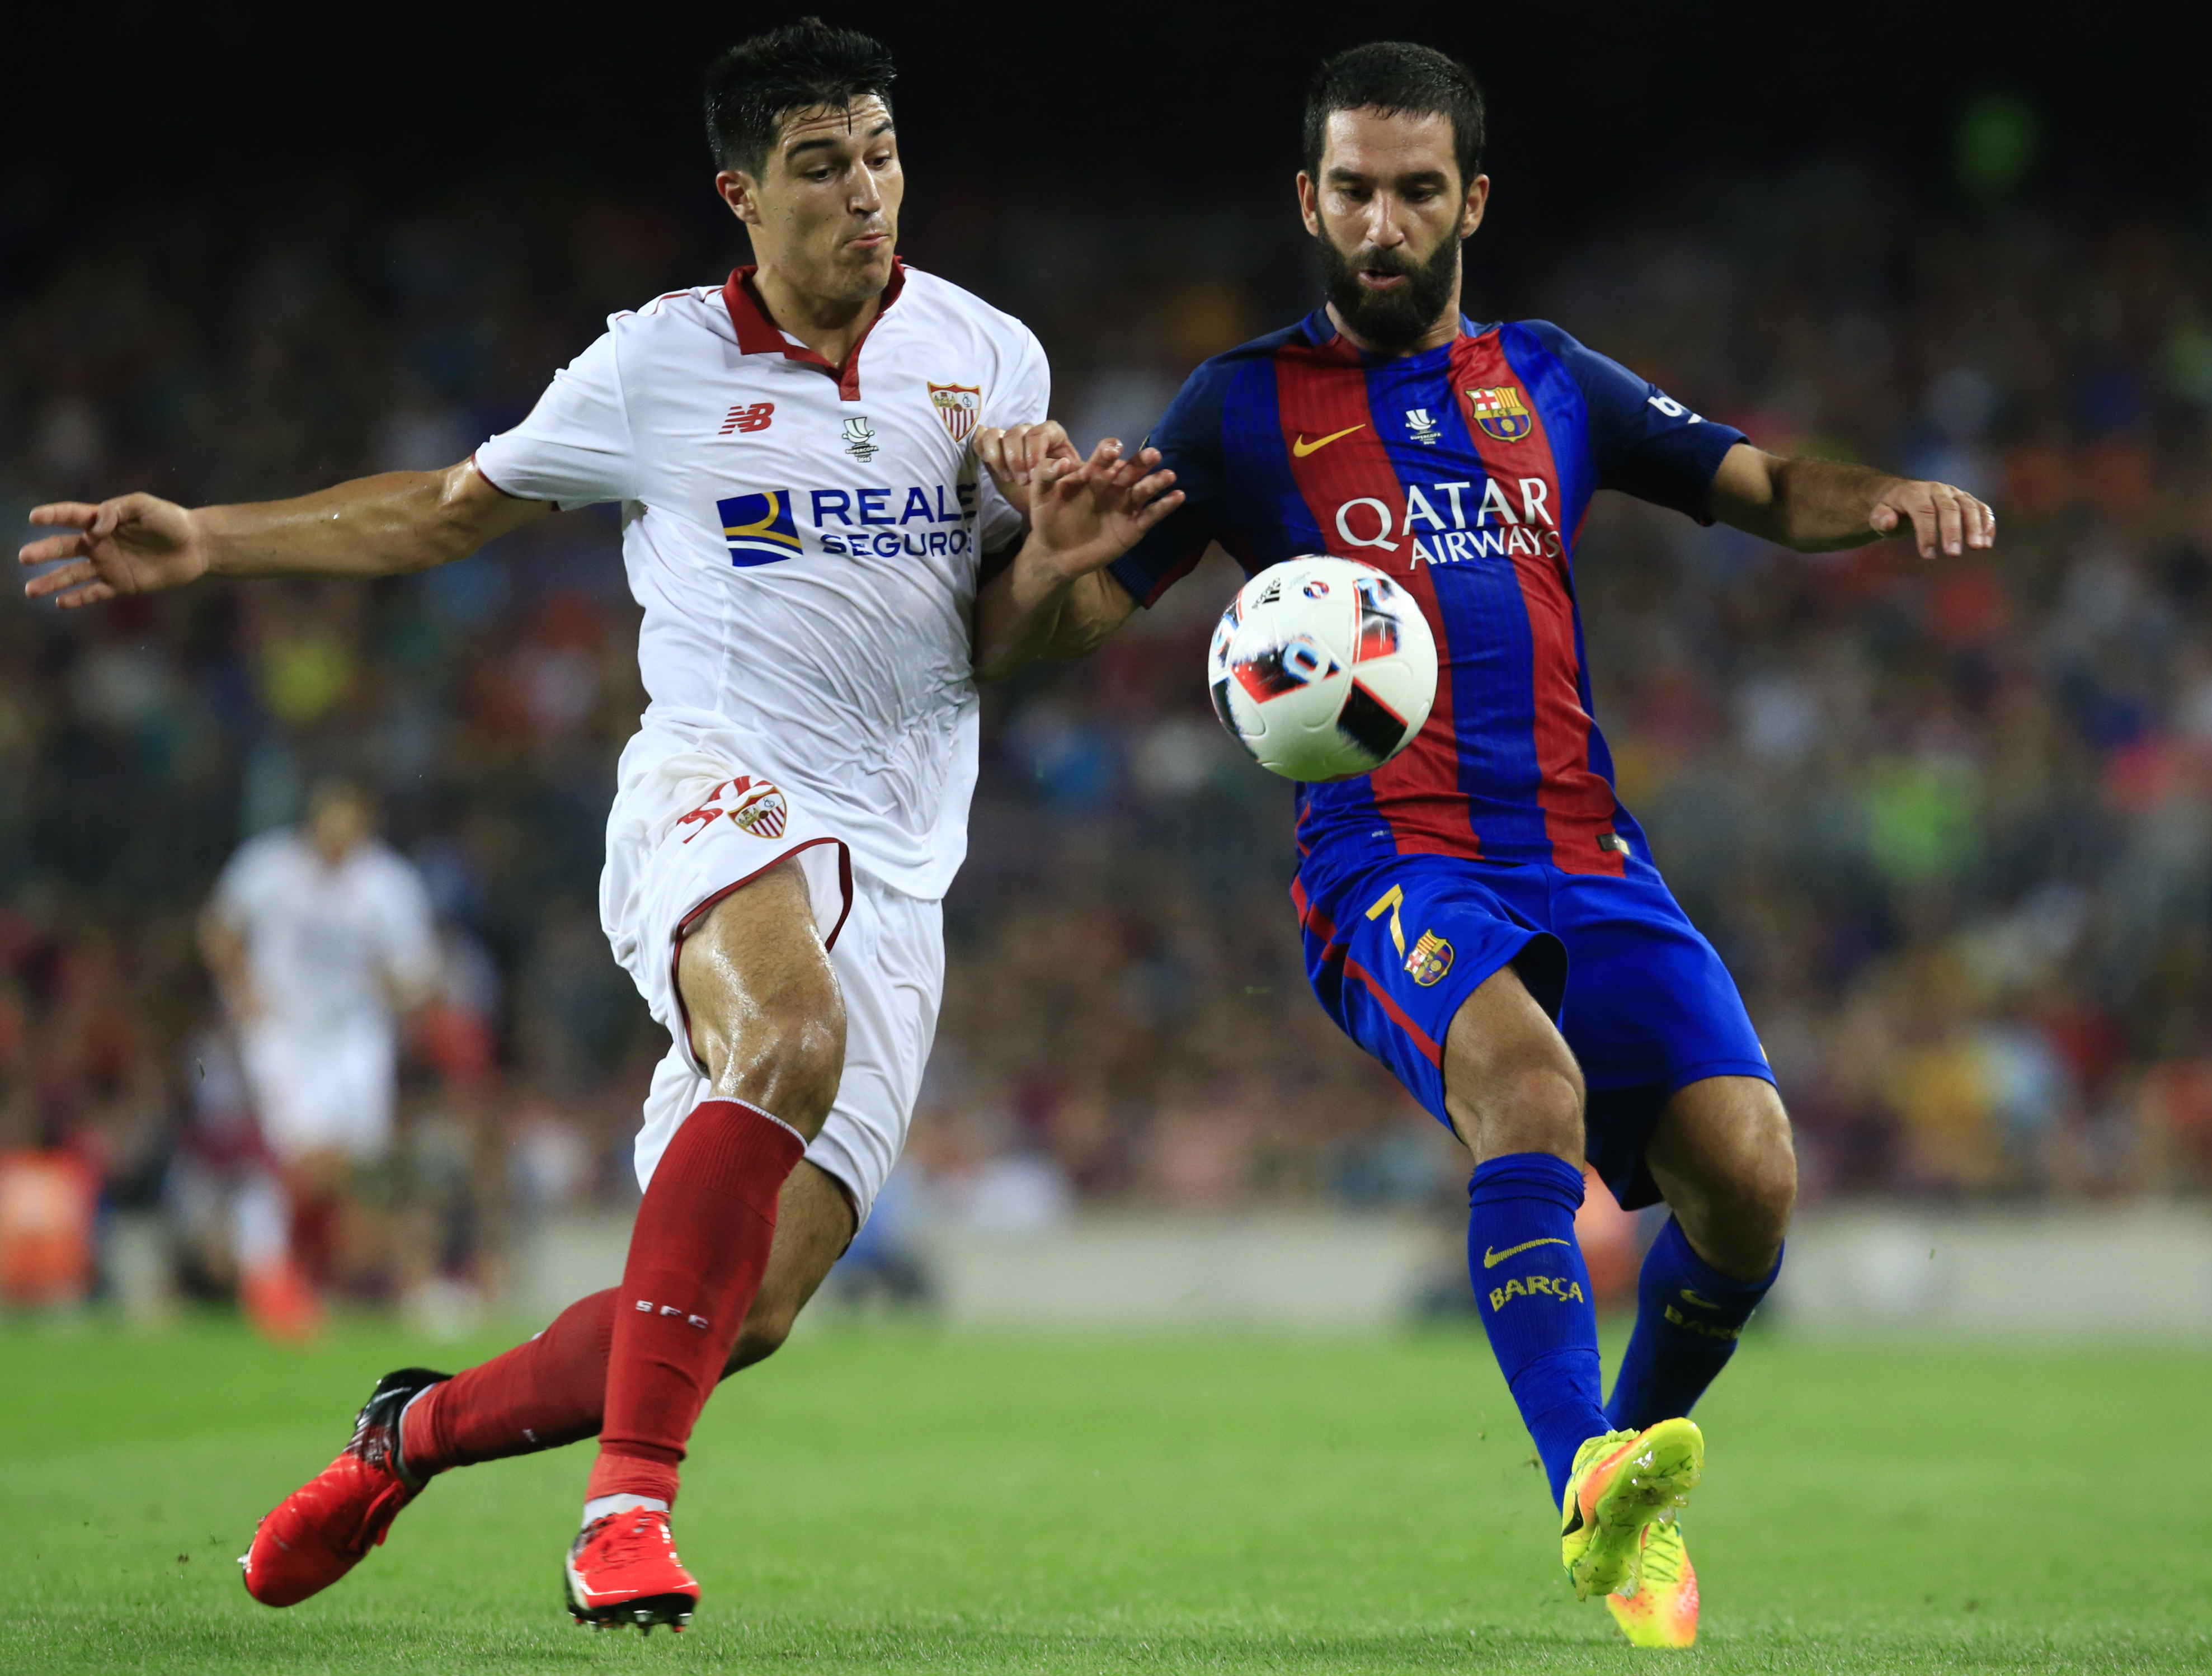 Sevilla's defender Diego Glez (L) vies with Barcelona's Turkish midfielder Arda Turan during the second leg of the Spanish Supercup football match between FC Barcelona and Sevilla FC at the Camp Nou stadium in Barcelona on August 17, 2016. / AFP / PAU BARRENA        (Photo credit should read PAU BARRENA/AFP/Getty Images)